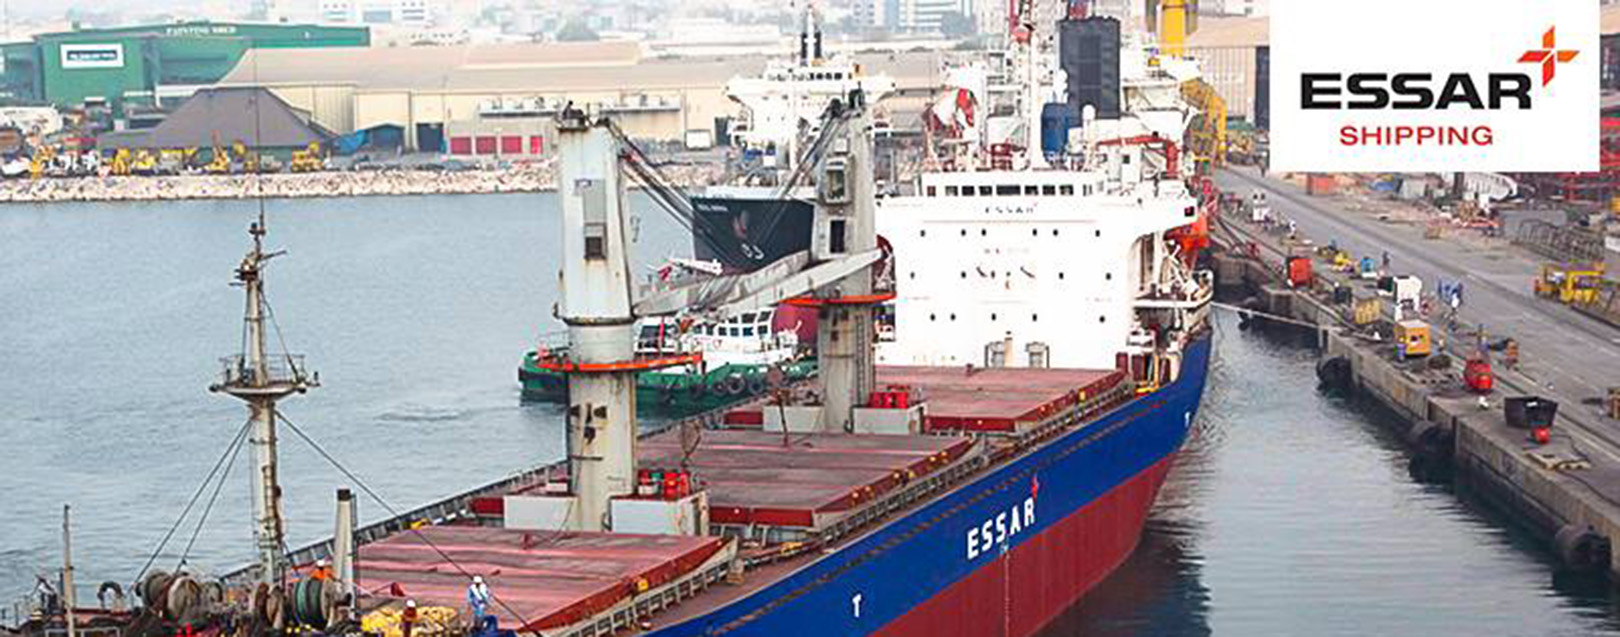 Essar Shipping Q2 loss increases to Rs 62 crore